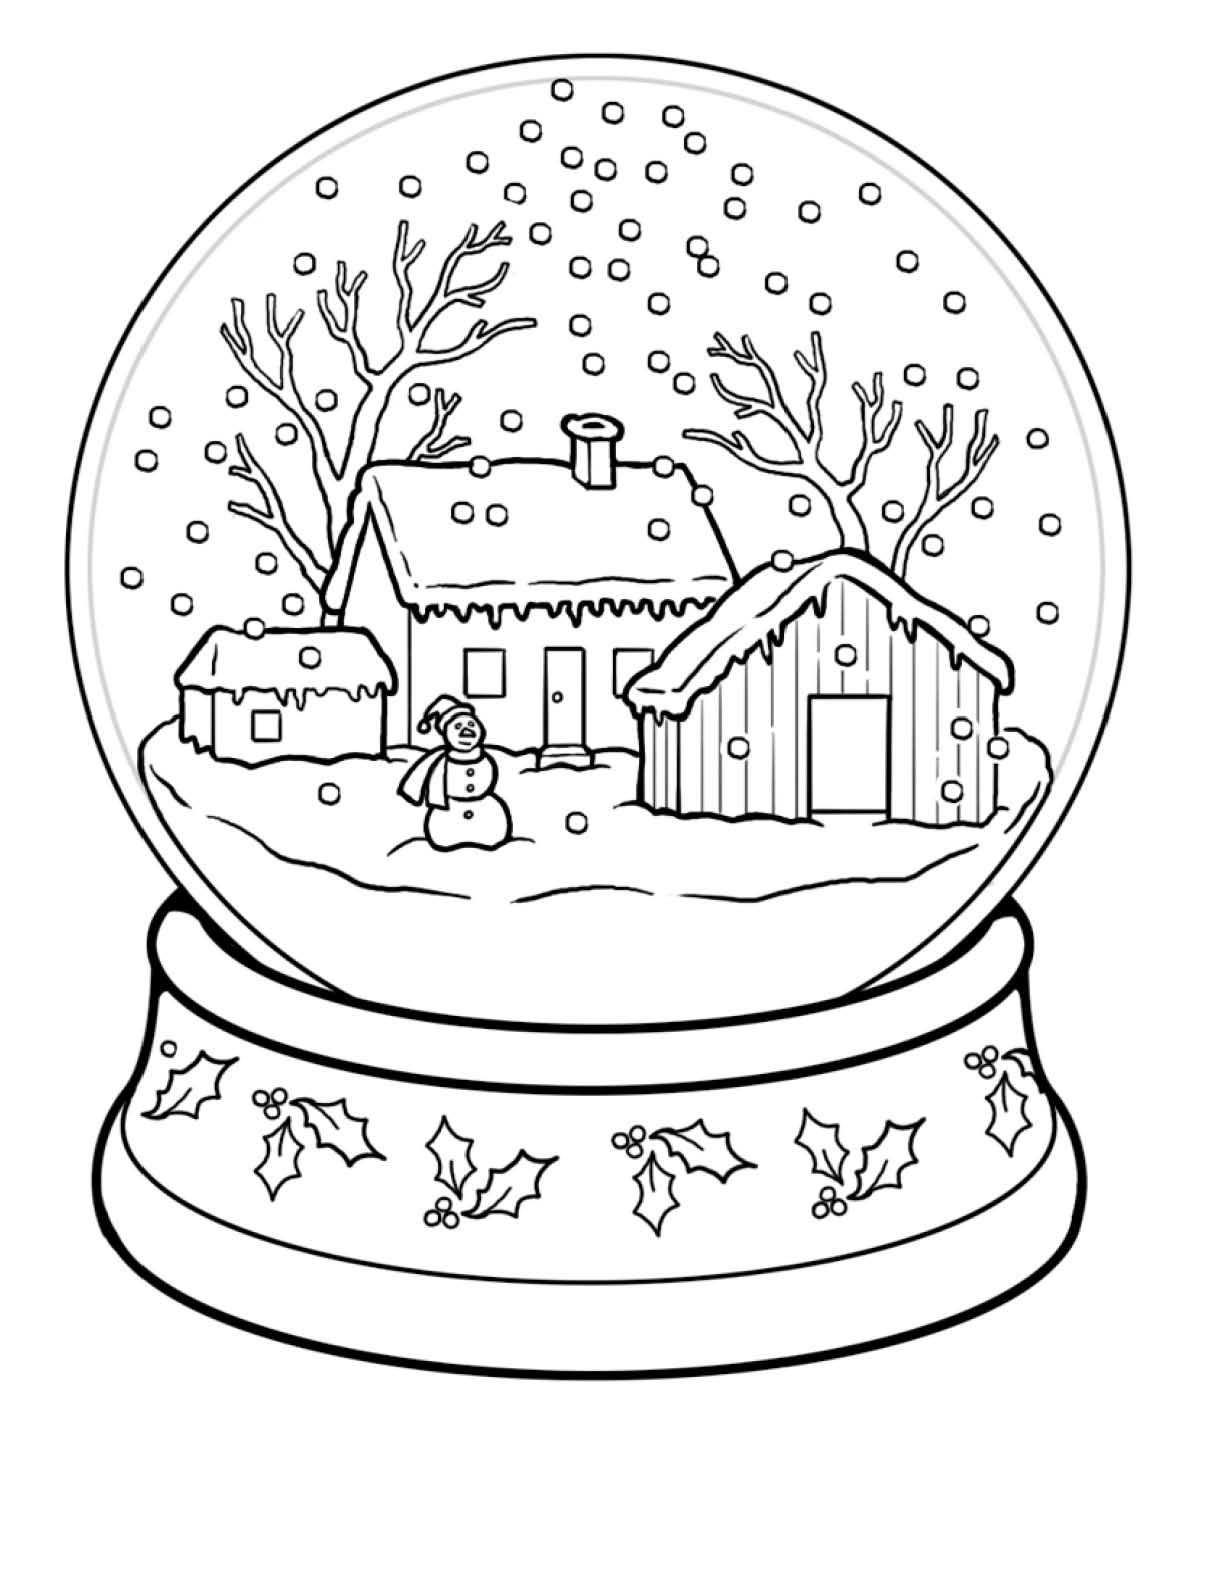 Winter Scenes Coloring Pages Printable | Coloring pages winter, Christmas coloring  pages, Holiday worksheets